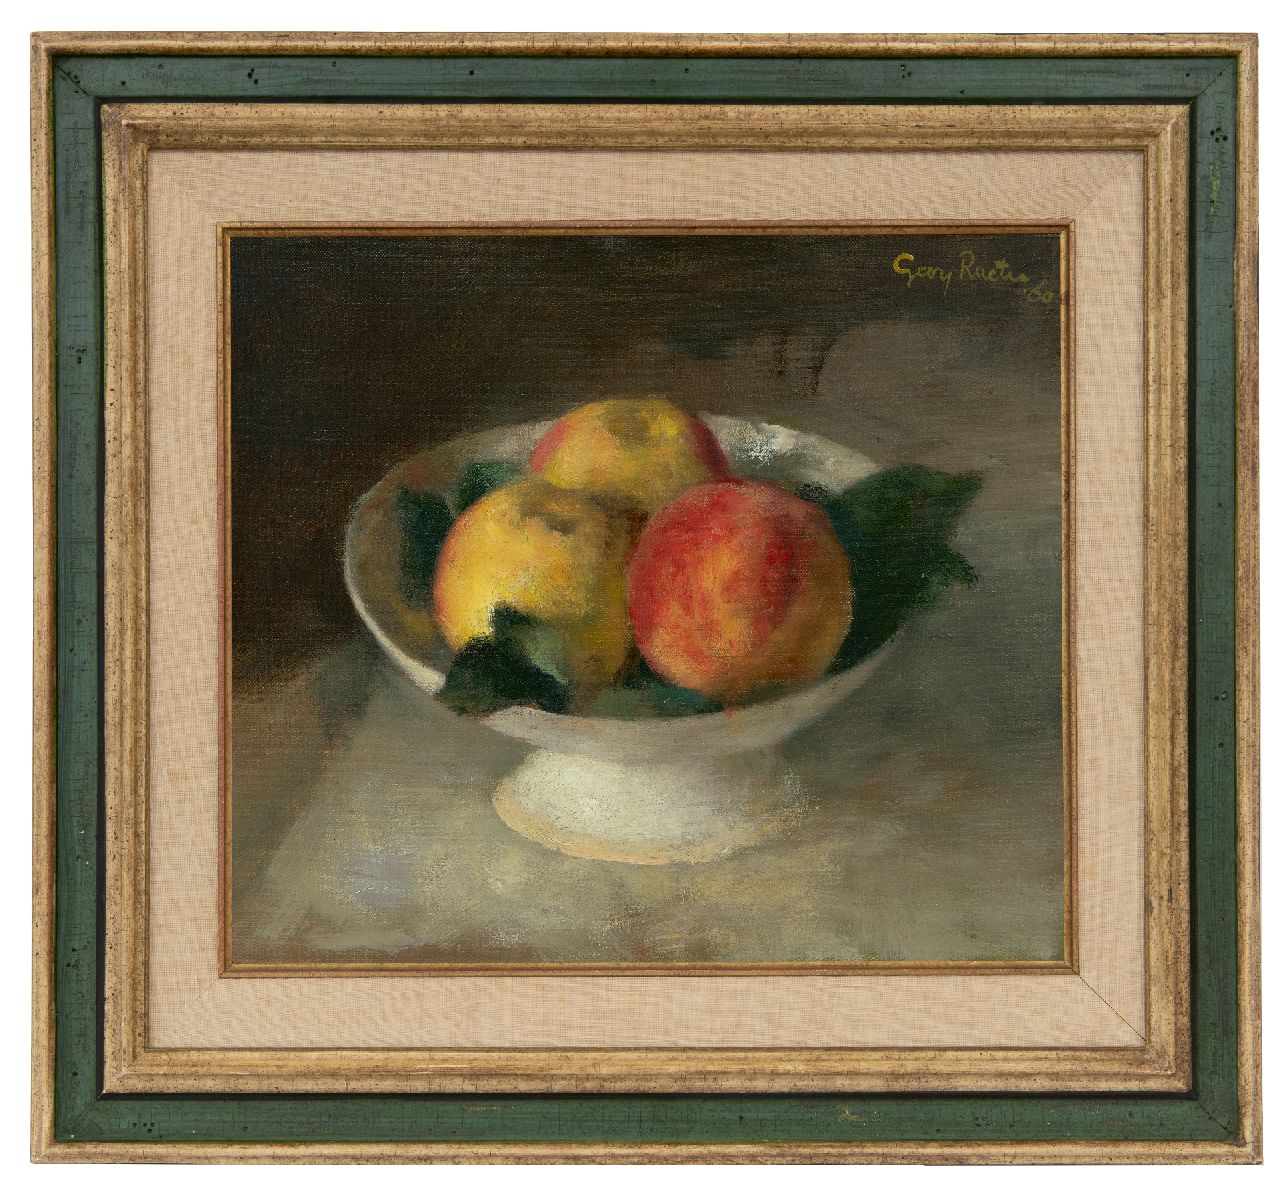 Rueter W.C.G.  | Wilhelm Christian 'Georg' Rueter | Paintings offered for sale | Peaches in white bowl, oil on canvas 28.0 x 32.2 cm, signed u.r. and dated '60